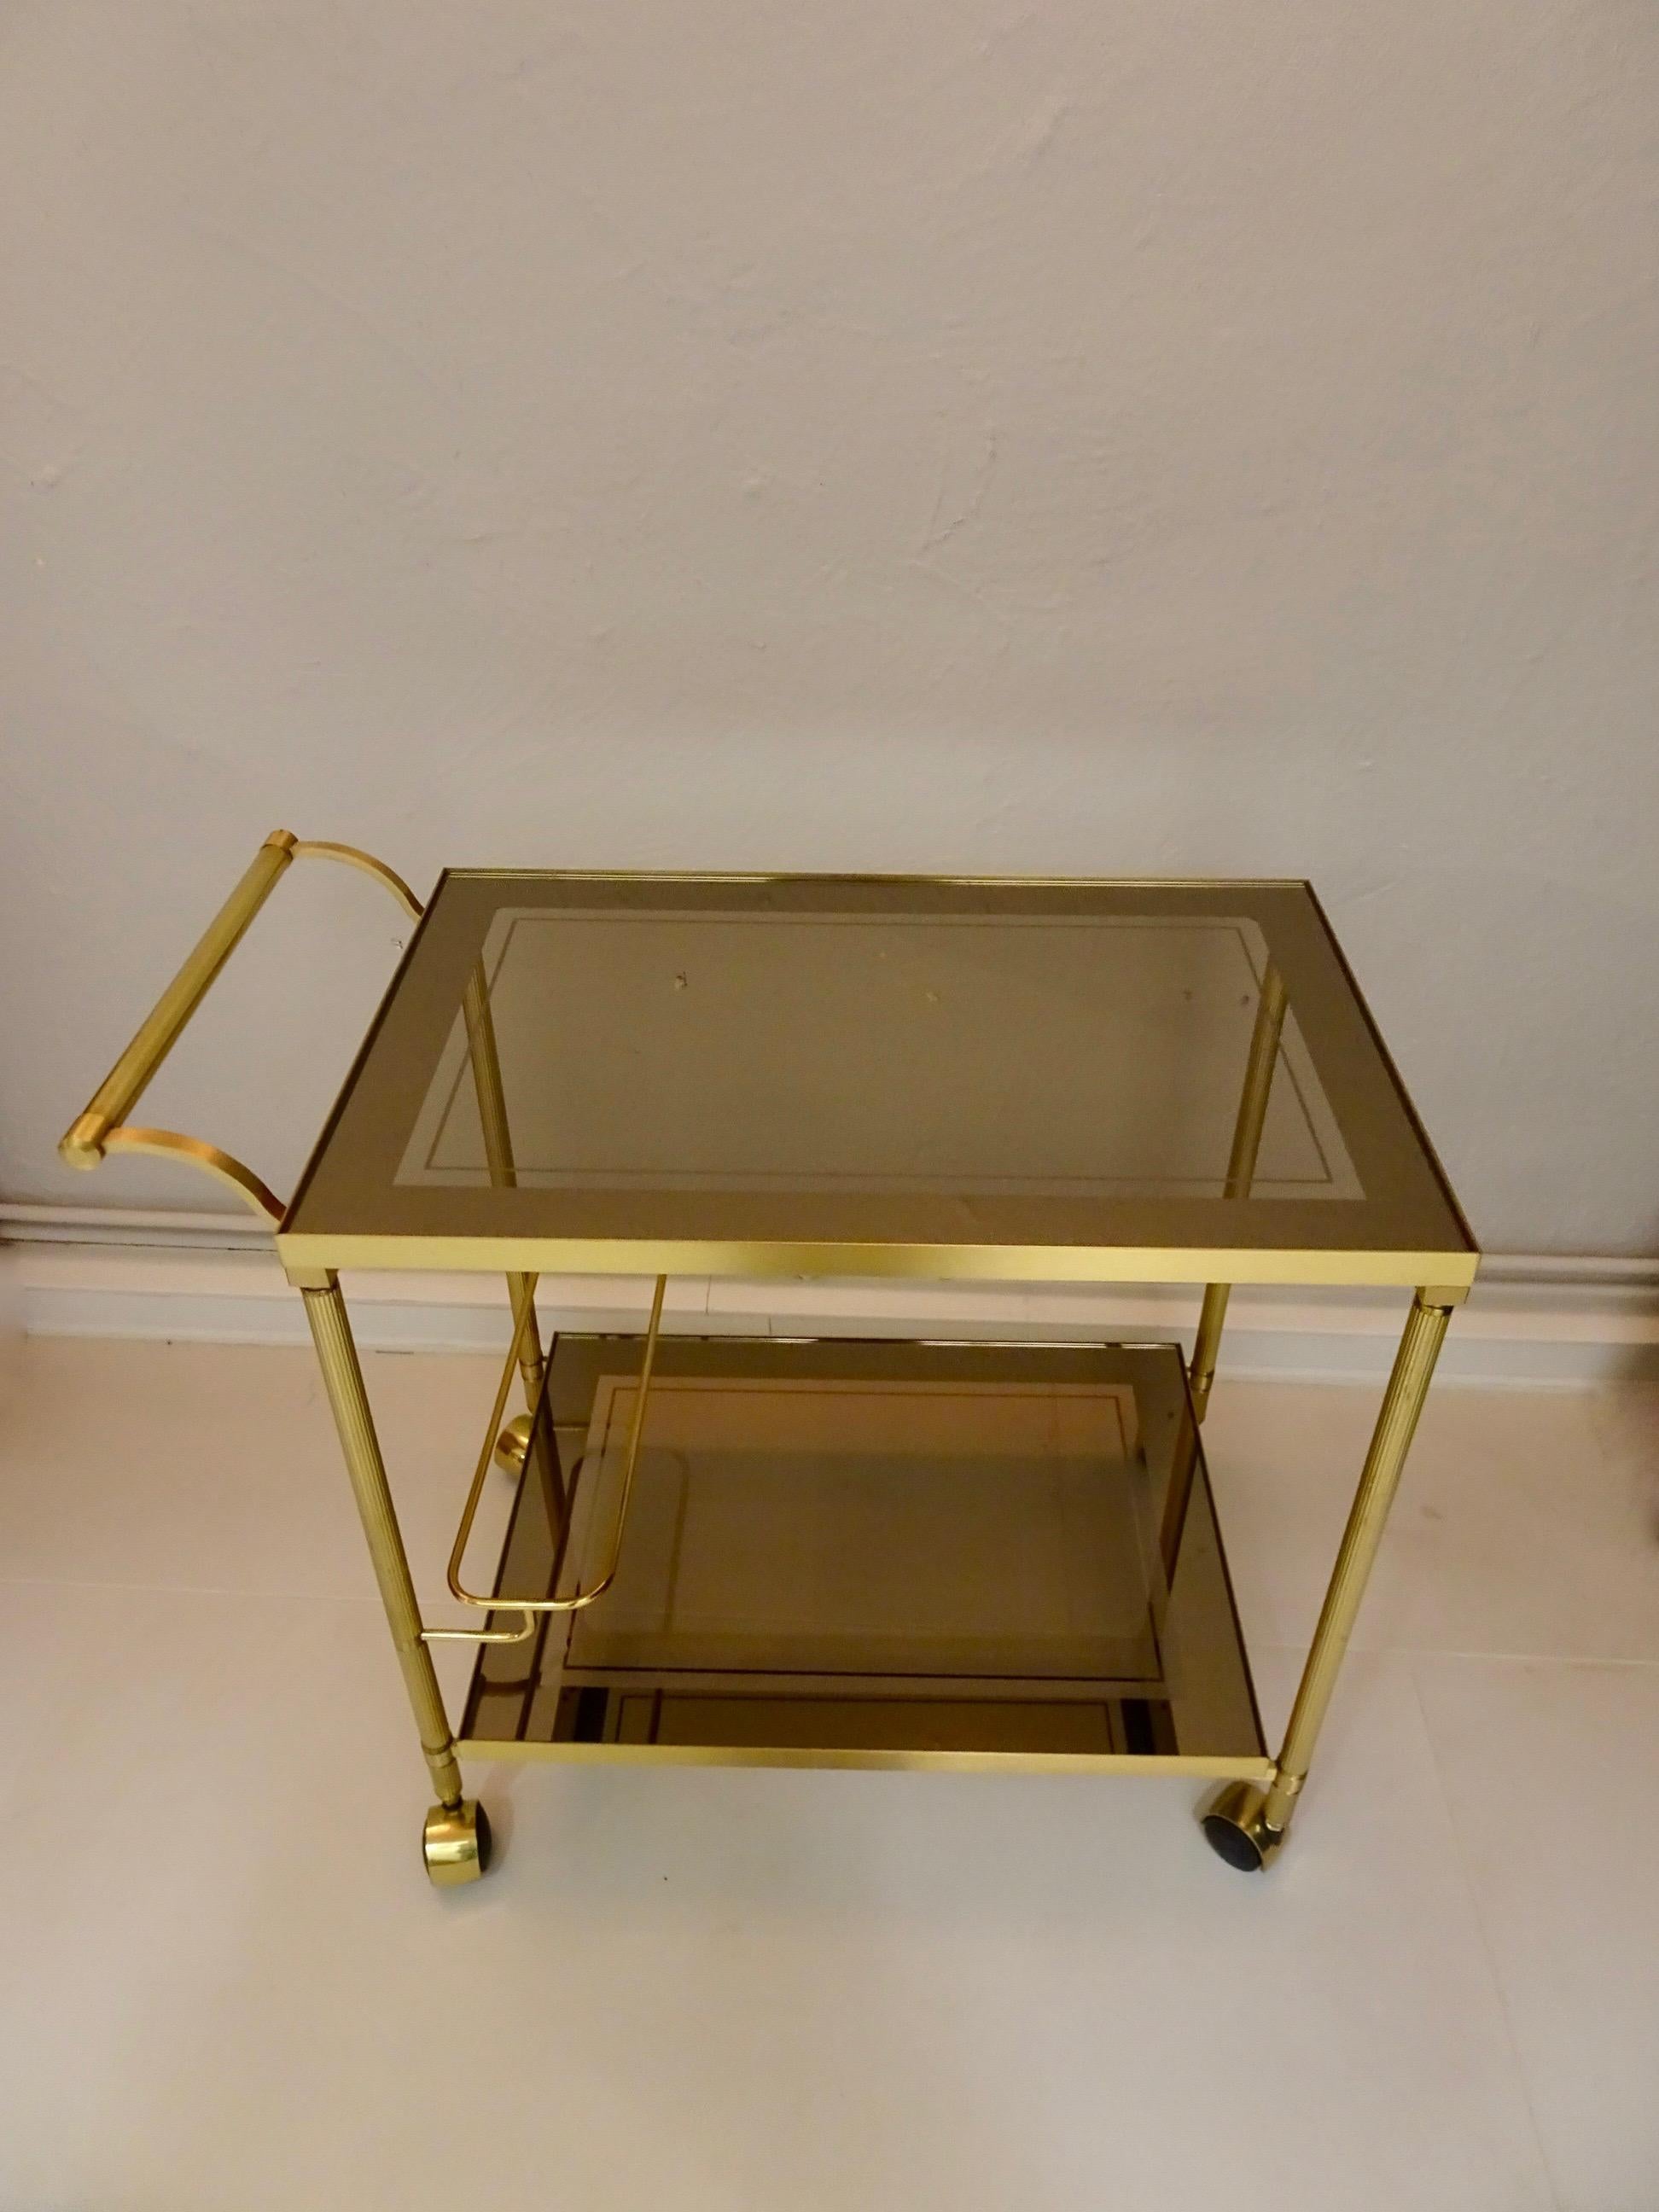 Classic neoclassical / Hollywood Regency gilded brass trolley. Dark tinted glass top.

Dimensions: 66.5 x 67.5 x 43 H cm

Condition: Very good condition, normal wear visible in picture.
  